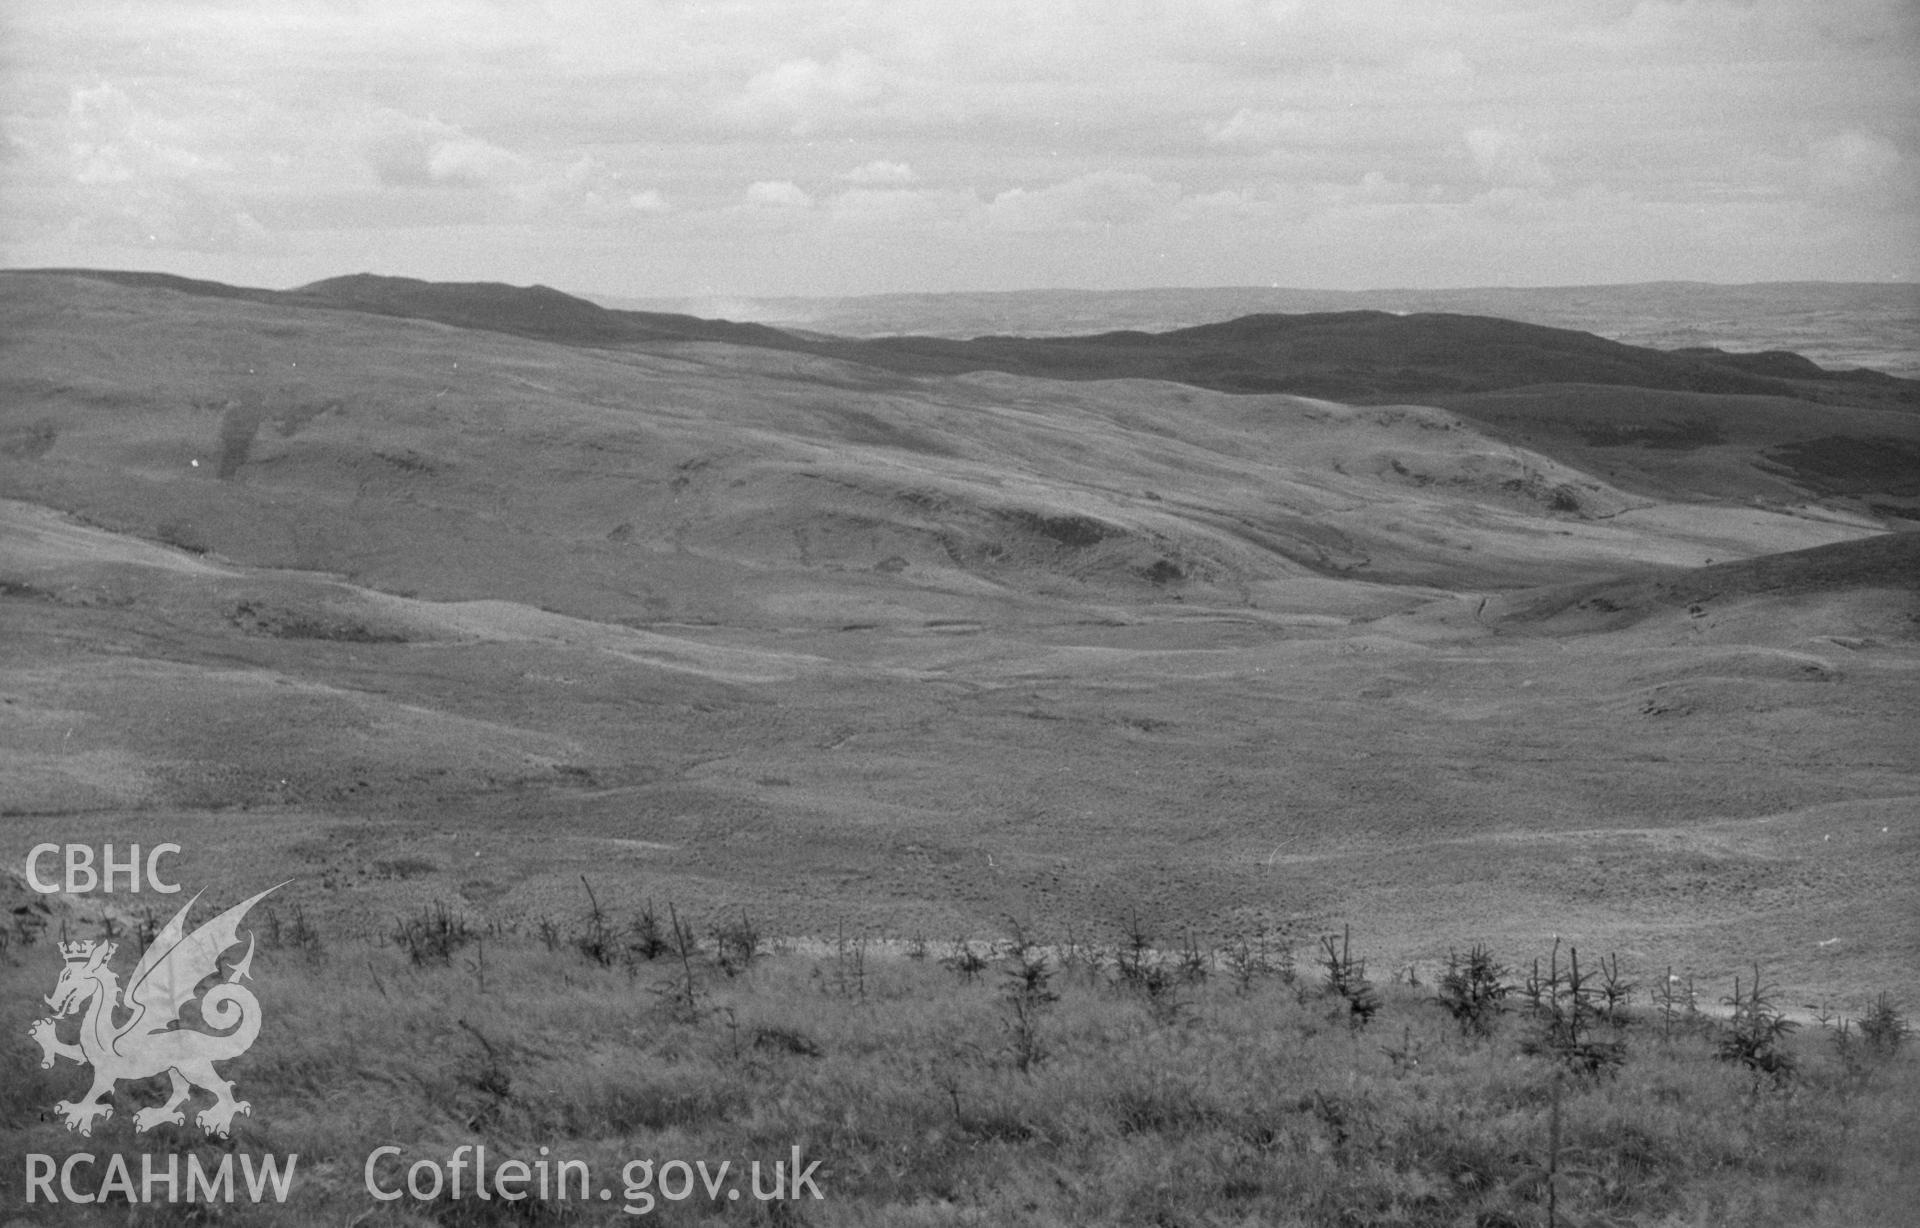 Digital copy of a black and white negative showing view down the Glasffrwd valley to Strata Florida and Pontrhydfendigaid. Photographed by Arthur O. Chater on 30th August 1965 from Grid Reference SN 779 627, looking north west.